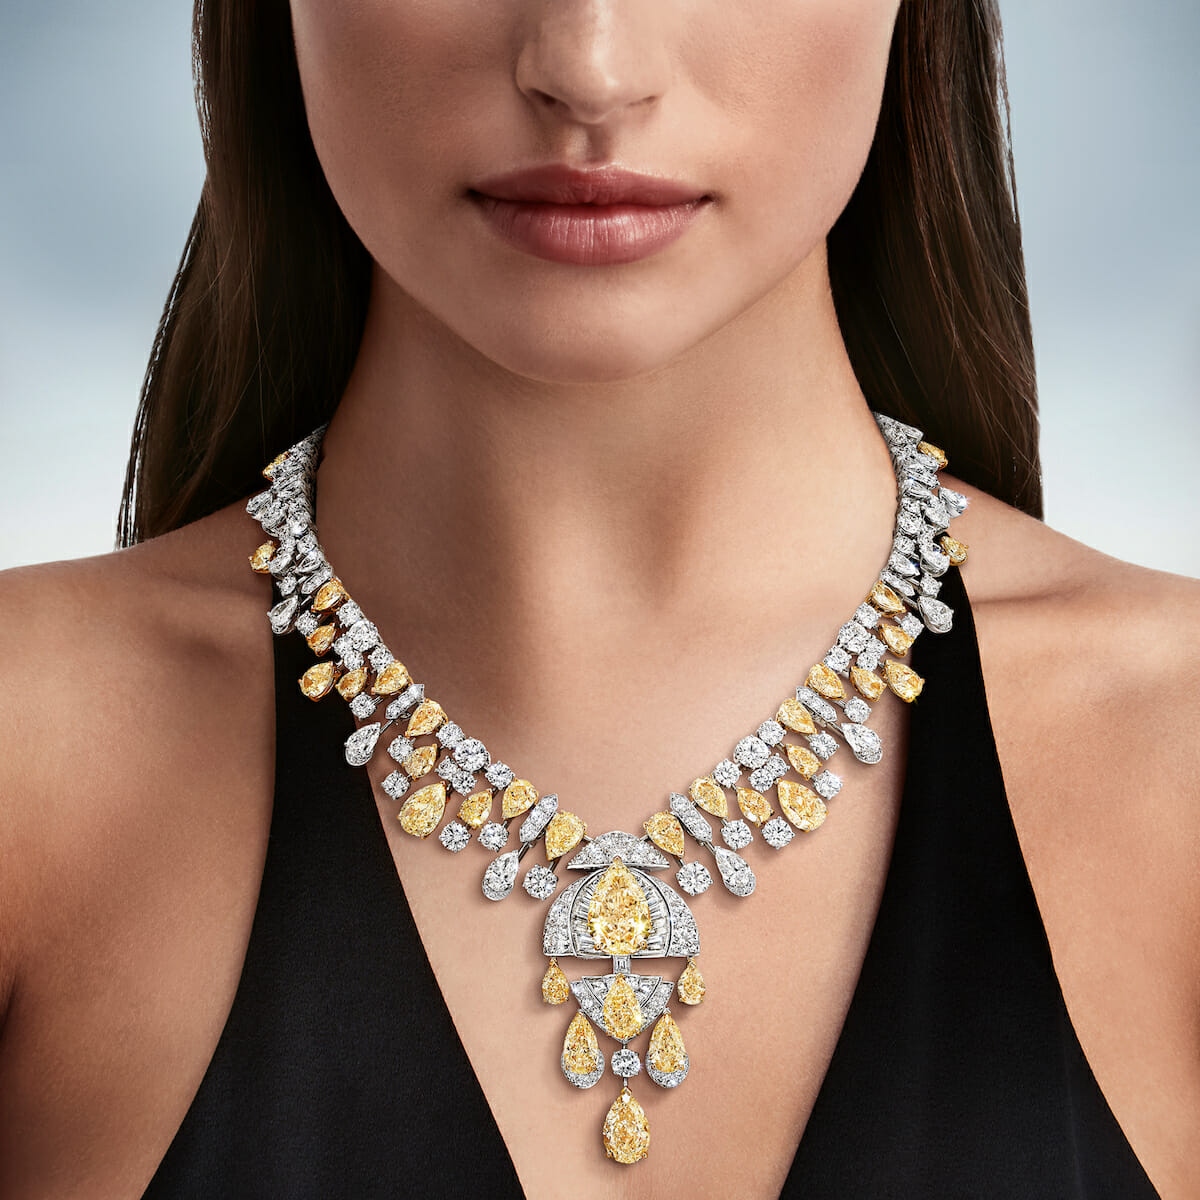 NECKLACES - CATEGORIES - HIGH JEWELLERY